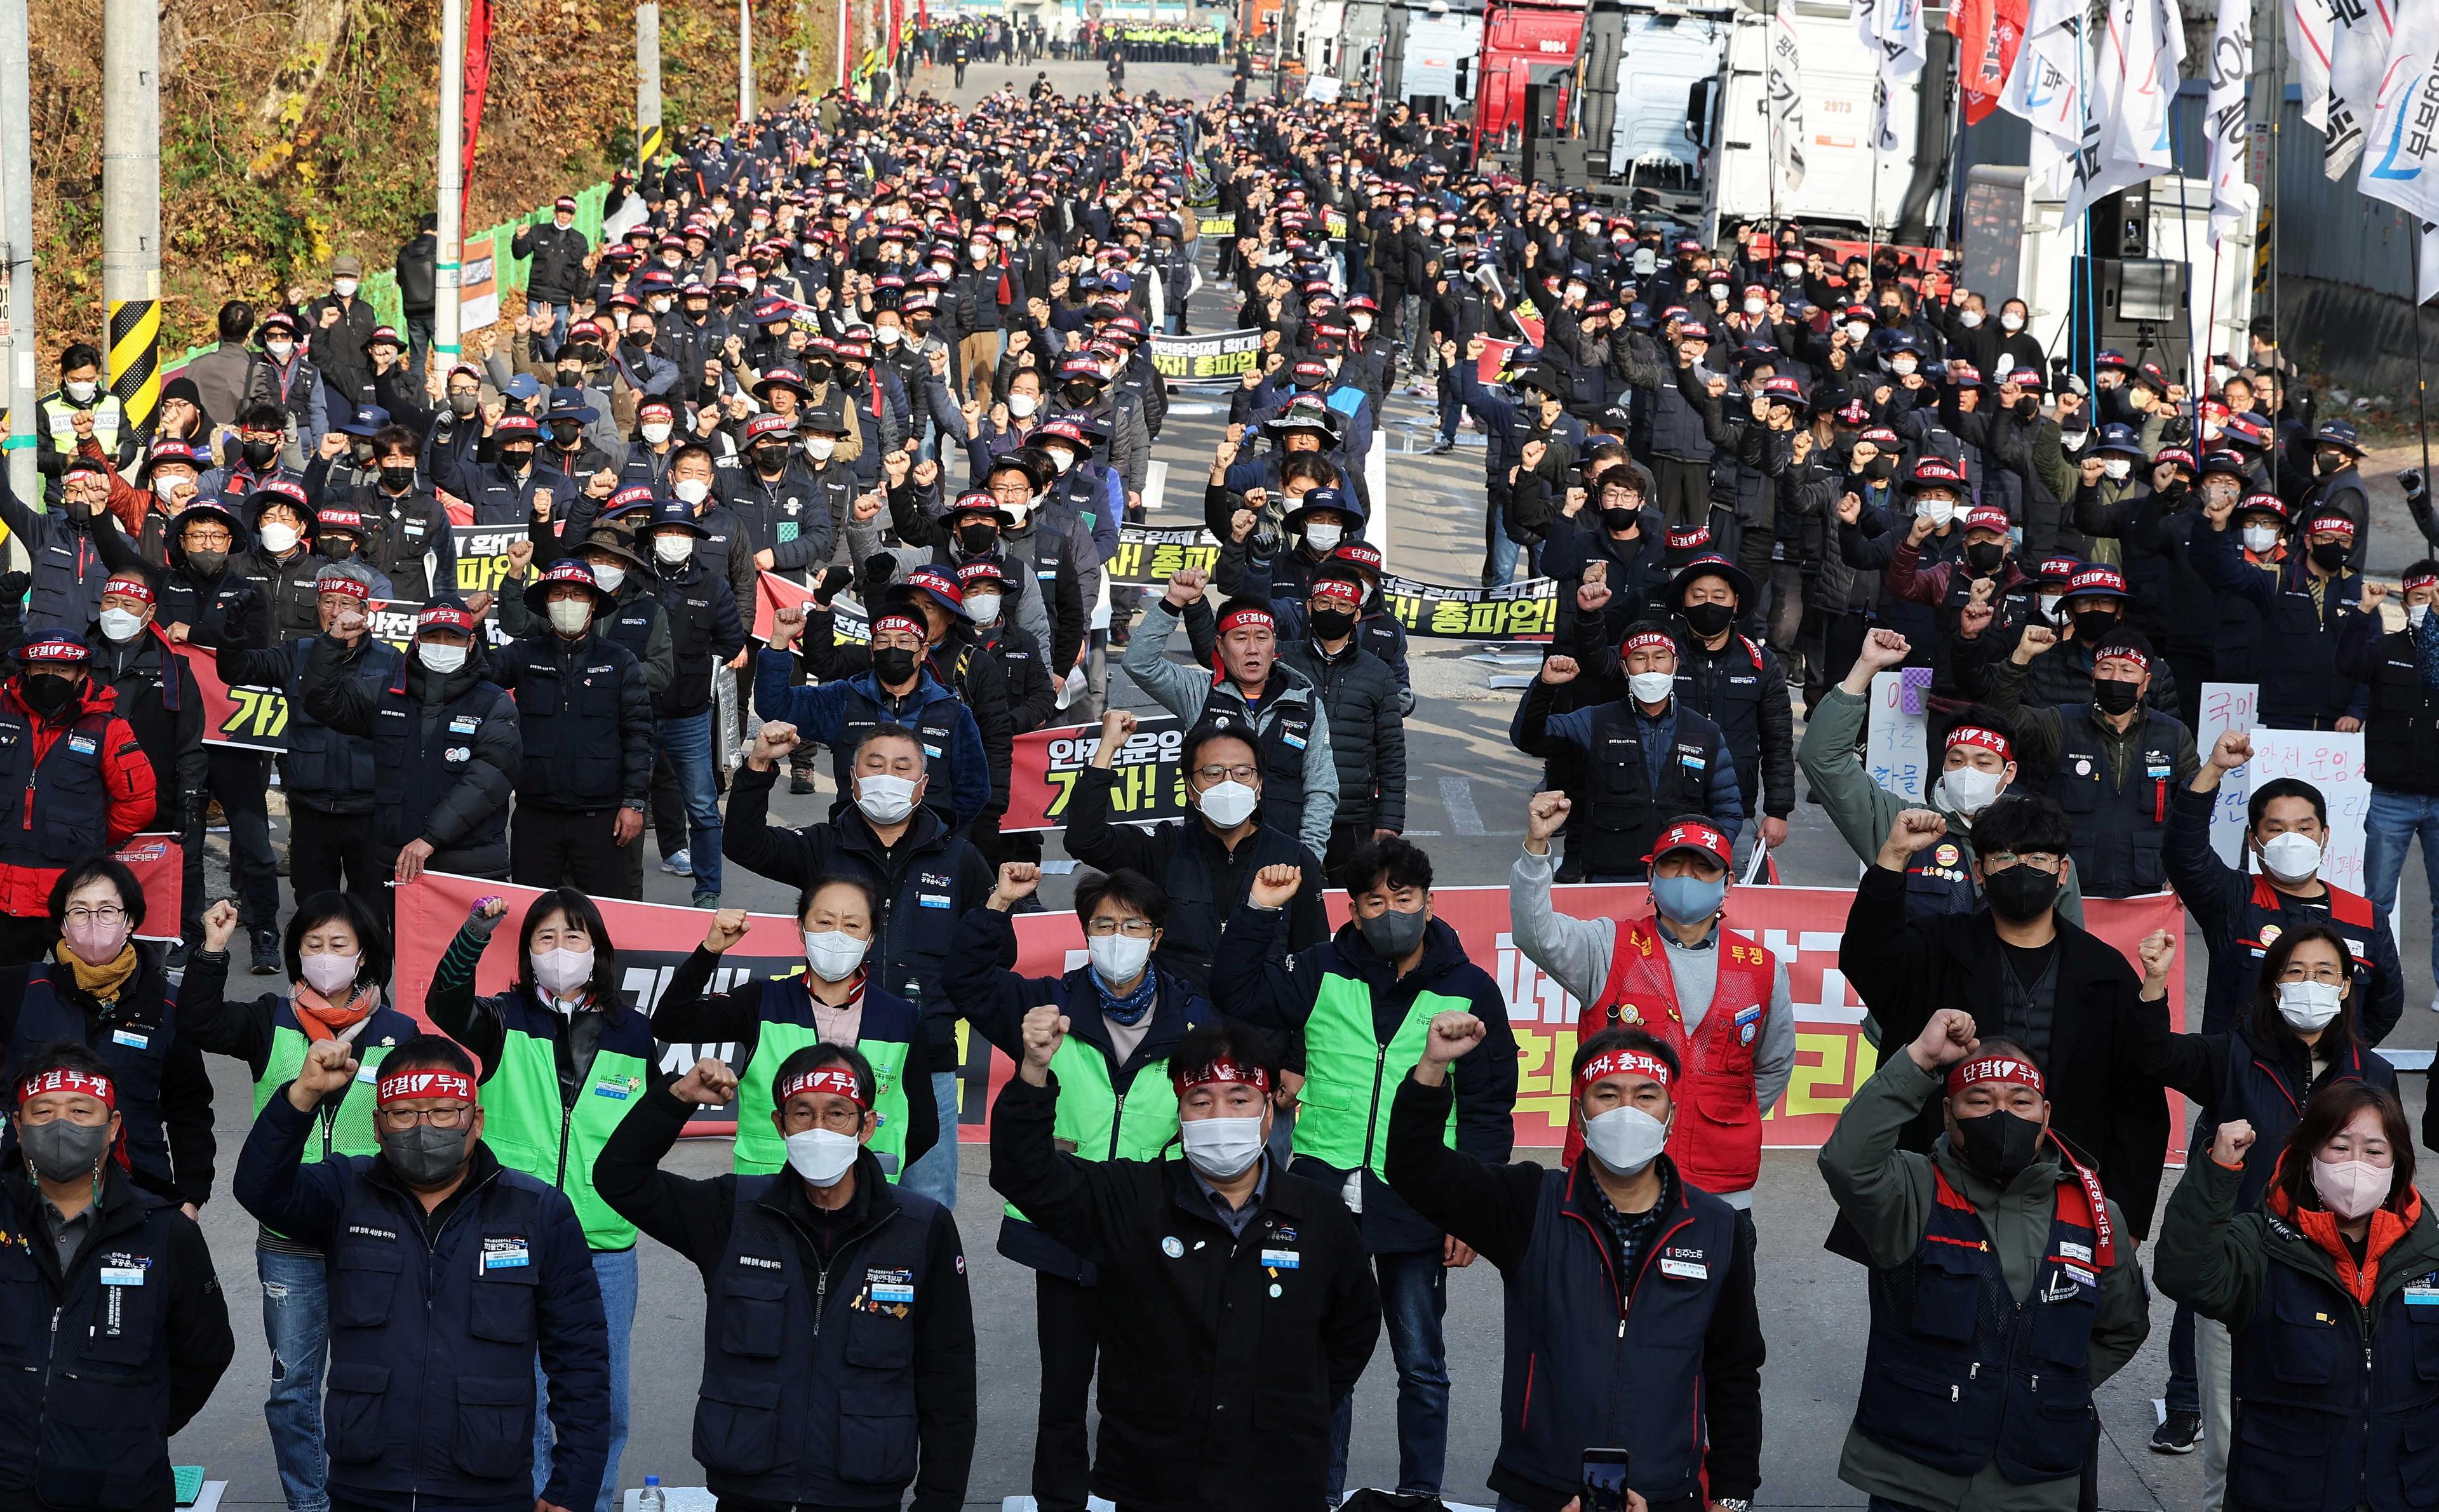 Unionised truckers shout slogans during their rally as they kick off their strike in front of transport hub Uiwang, south of Seoul, South Korea Nov 24. Photo: Reuters